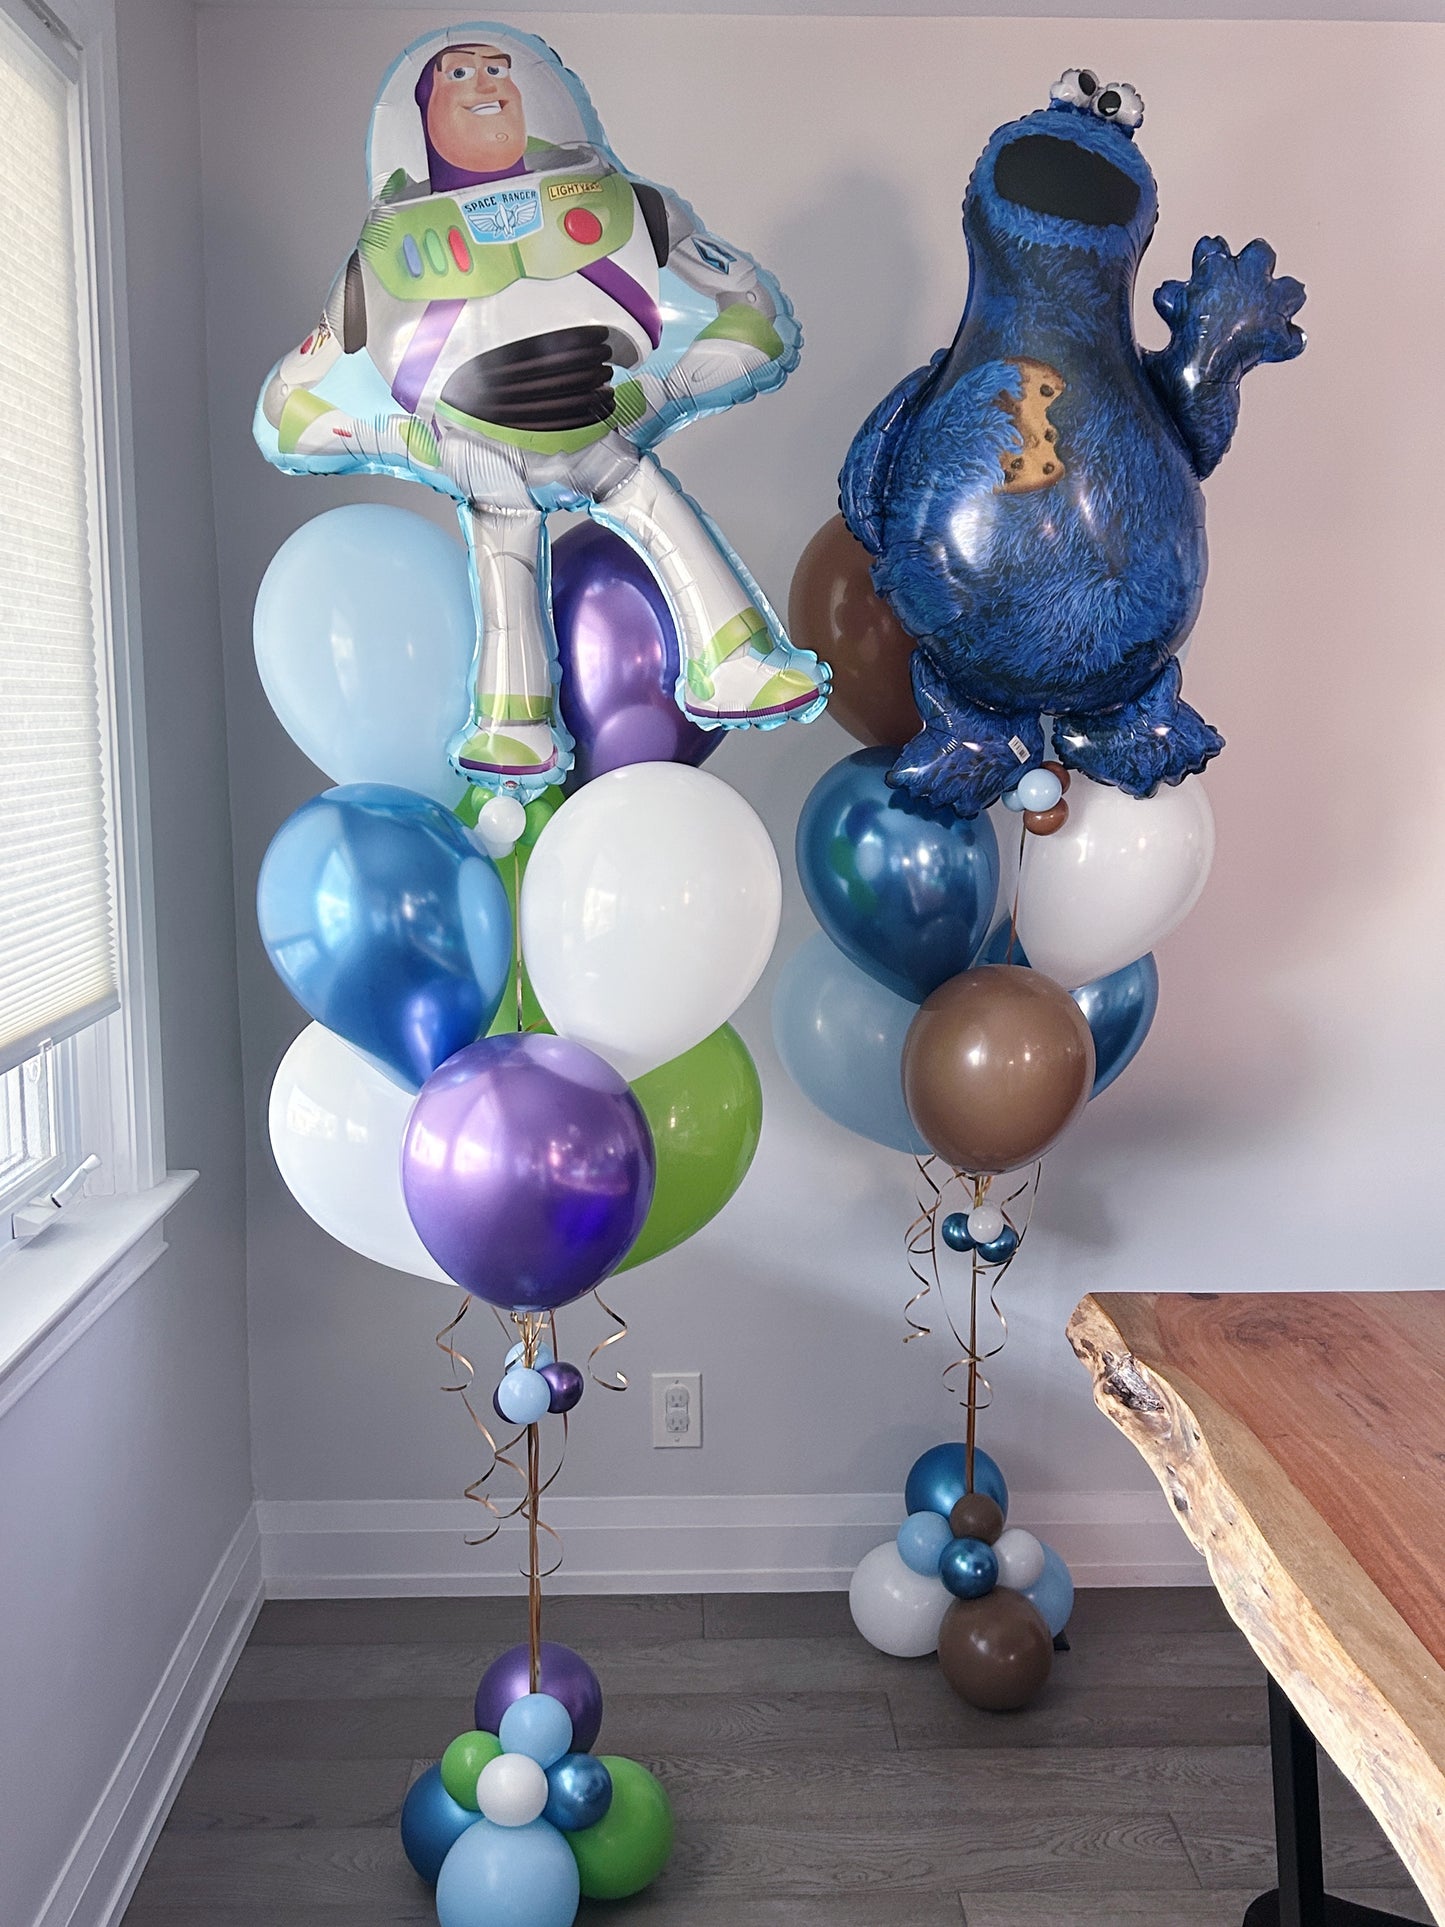 cookie monster balloon bundle toronto- confetti my party